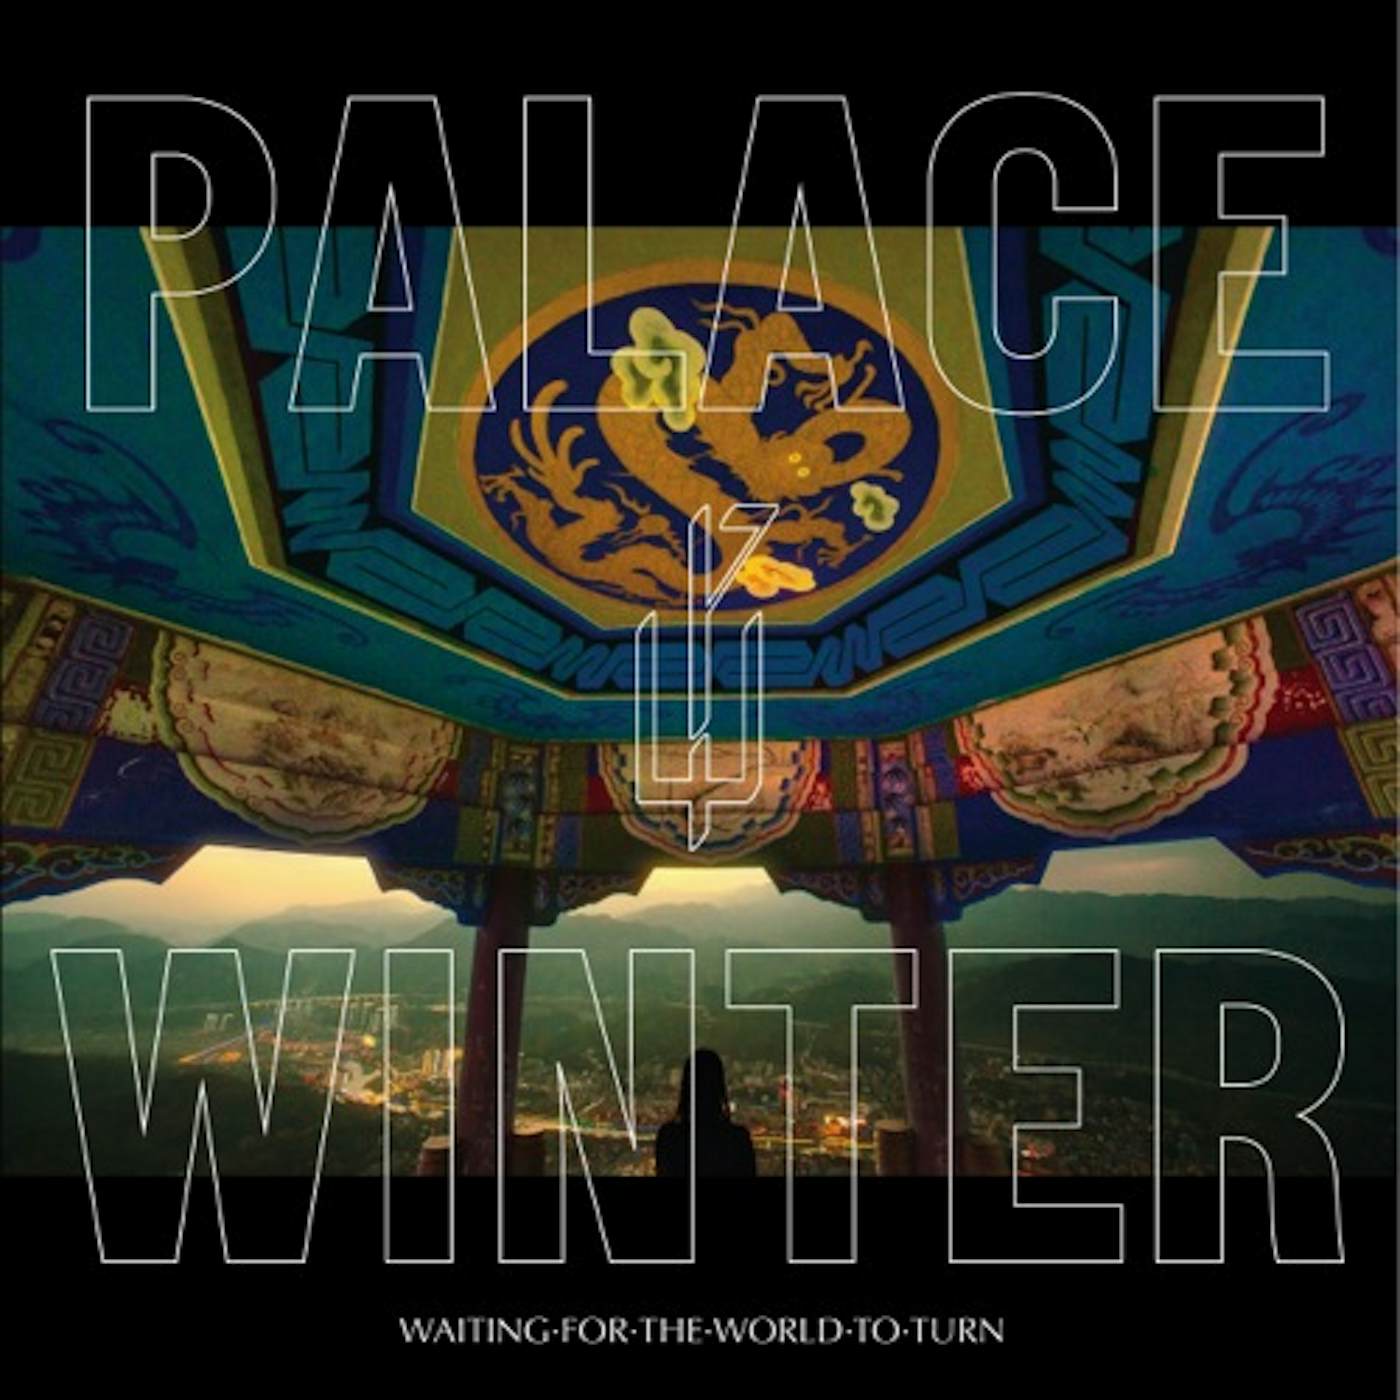 Palace Winter Waiting for the World to Turn Vinyl Record